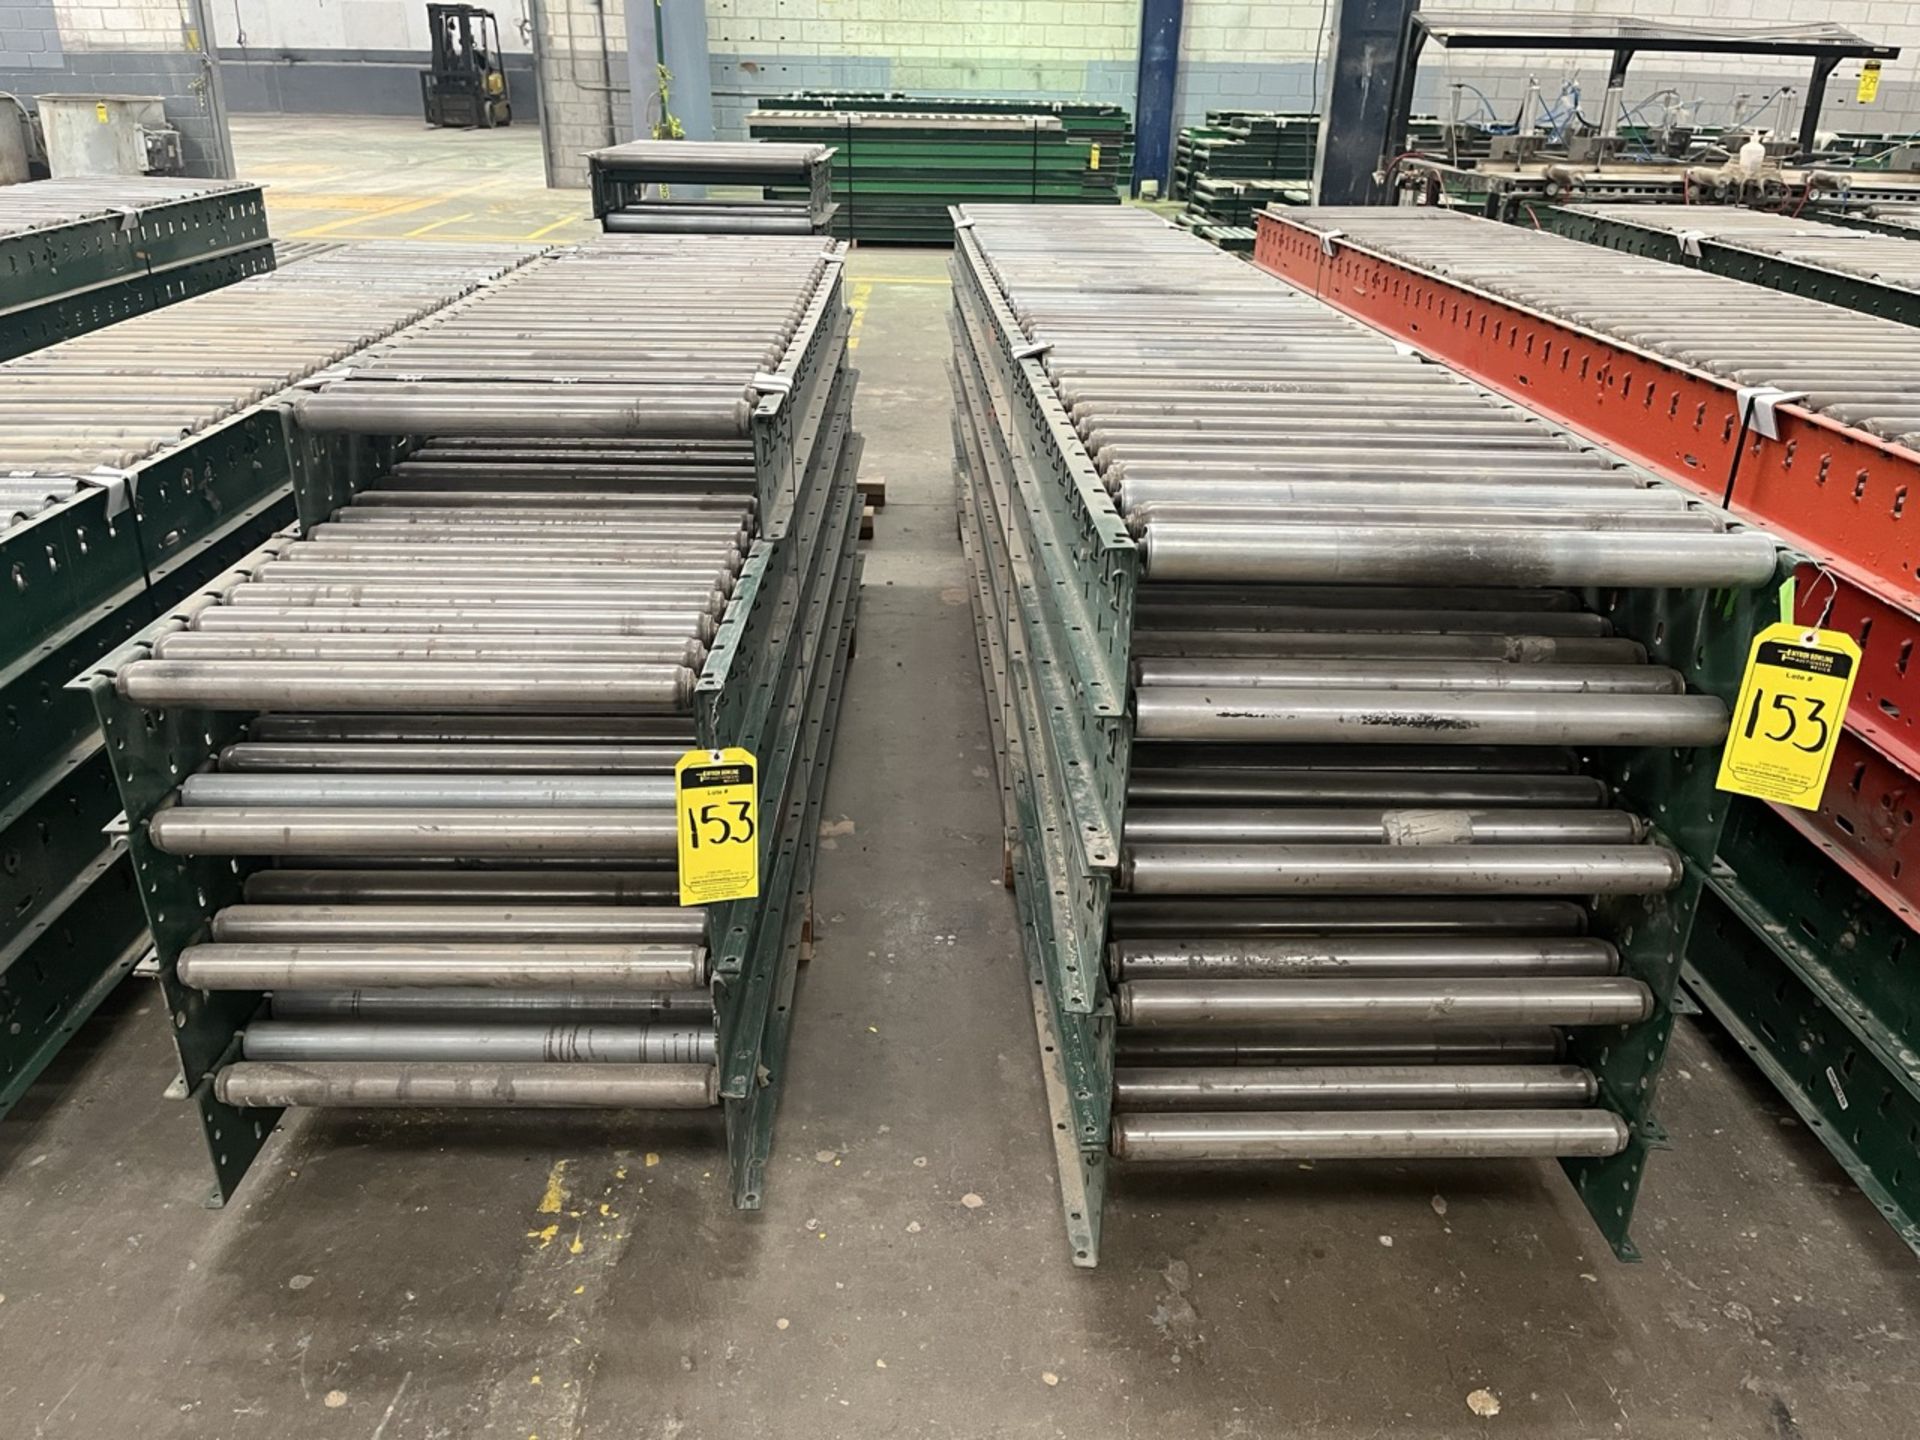 10 pieces of roller conveyor belt measuring approx. 62 cm wide by different lengths; includes 6 cou